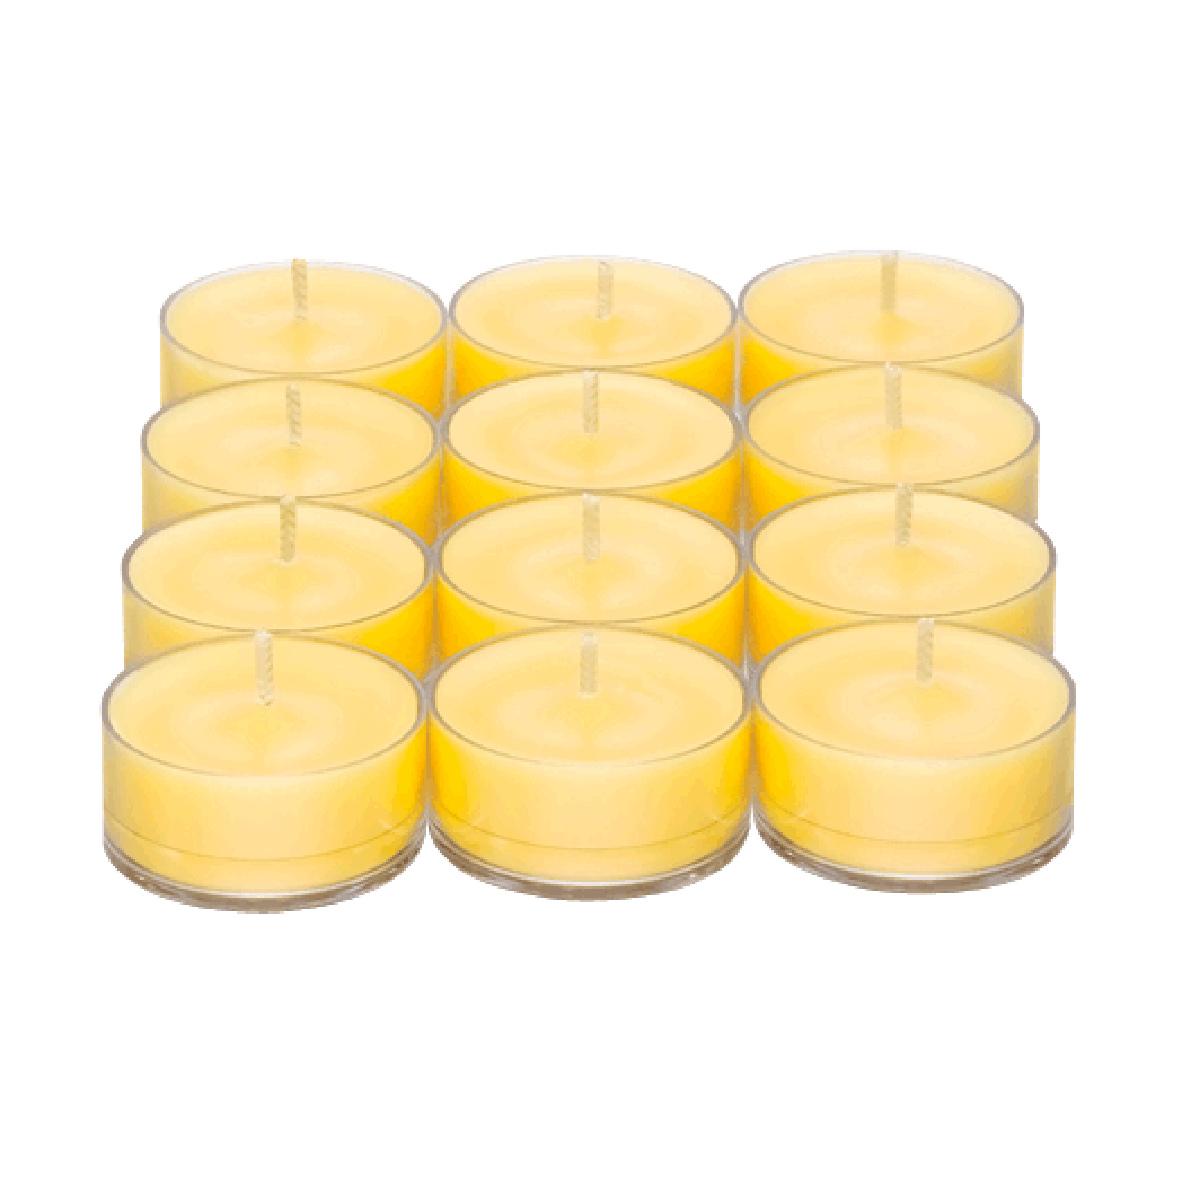 Merry Mimosa Universal Tealight Candles